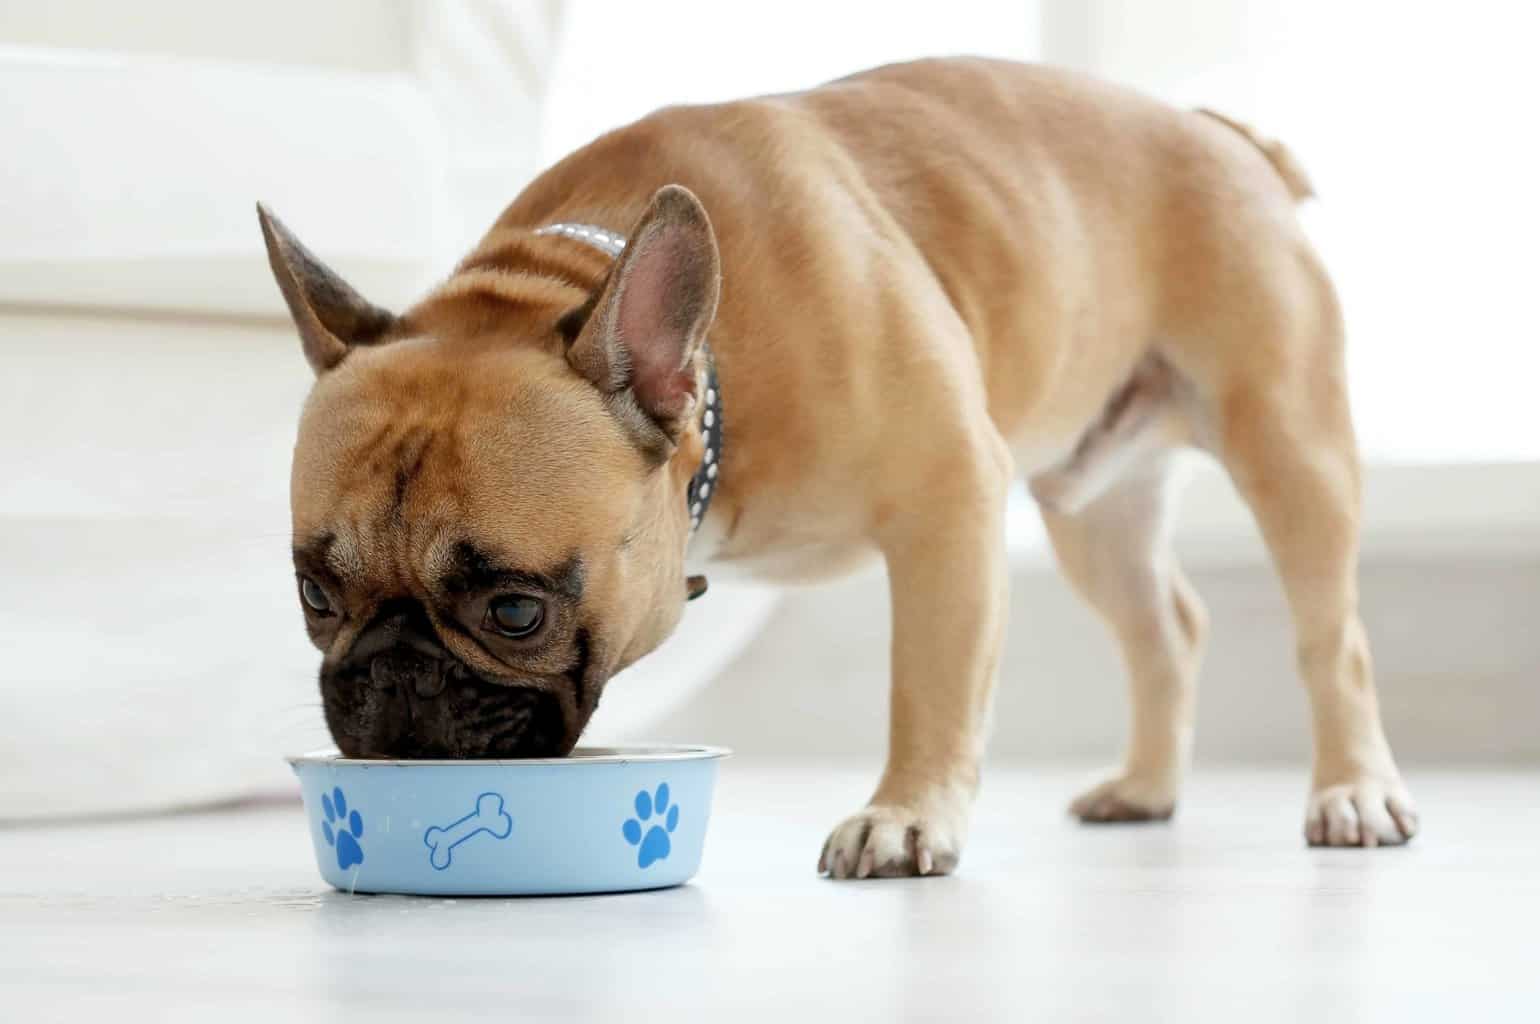 French Bulldog eats from dog food bowl. Understand dog nutrition. If you don't meet your dog's nutritional needs, you can cause a range of health problems and shorten its lifespan.